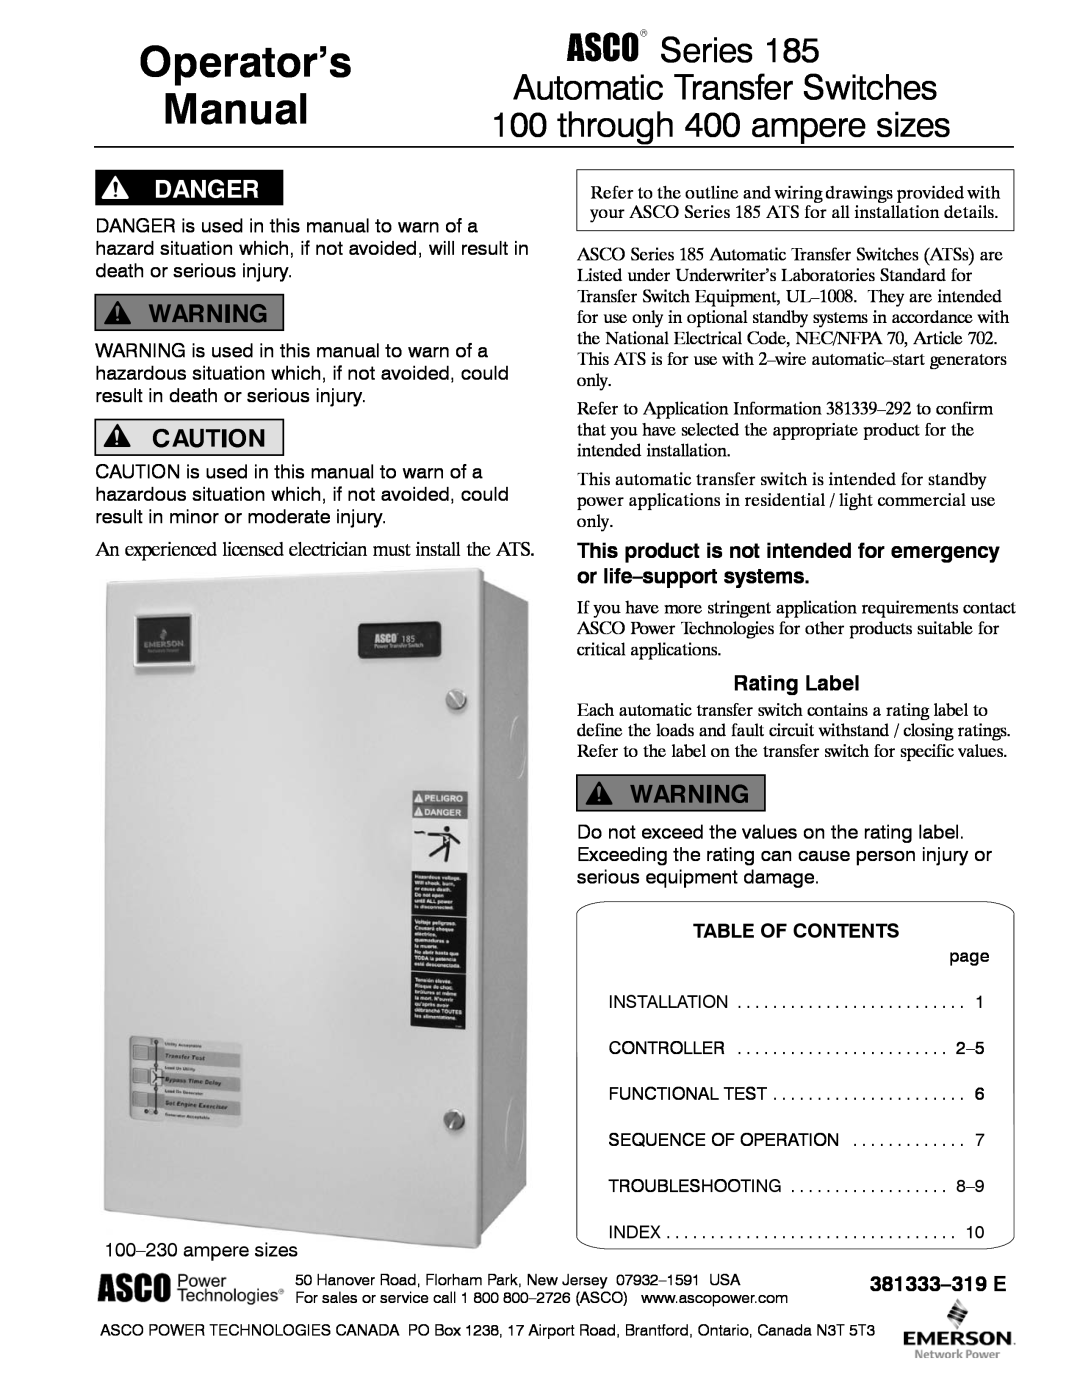 Emerson 185 manual This product is not intended for emergency or life-support systems, Rating Label, Operator’s Manual 